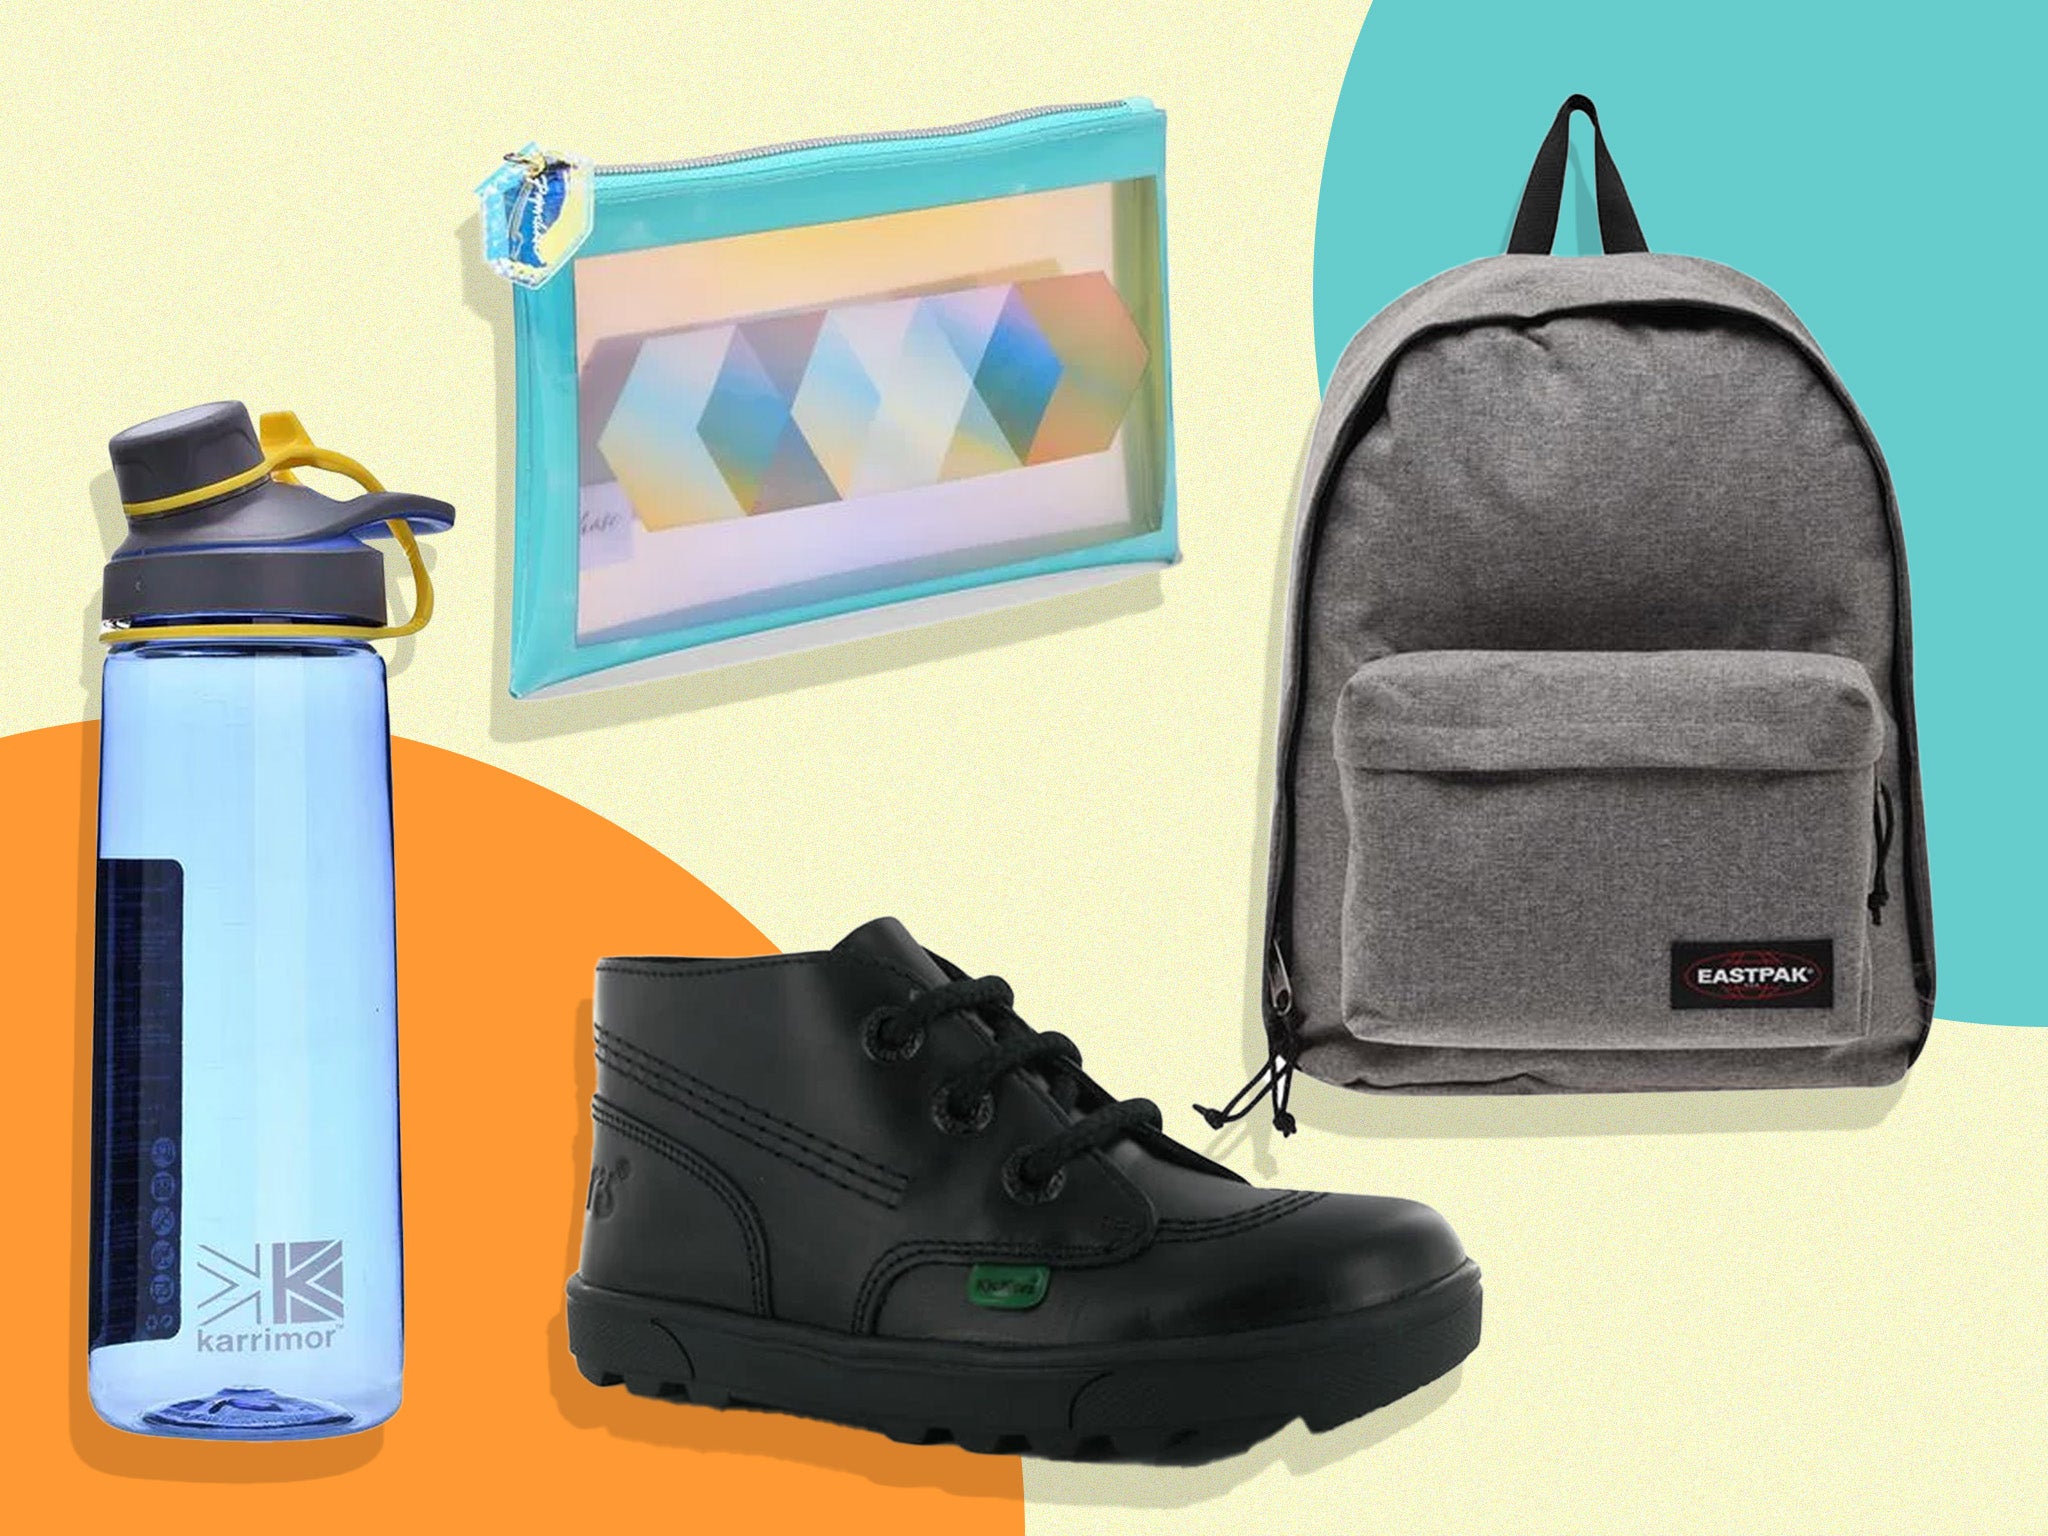 The back to school deals to tick off your list – shop stationery, school bags and more 